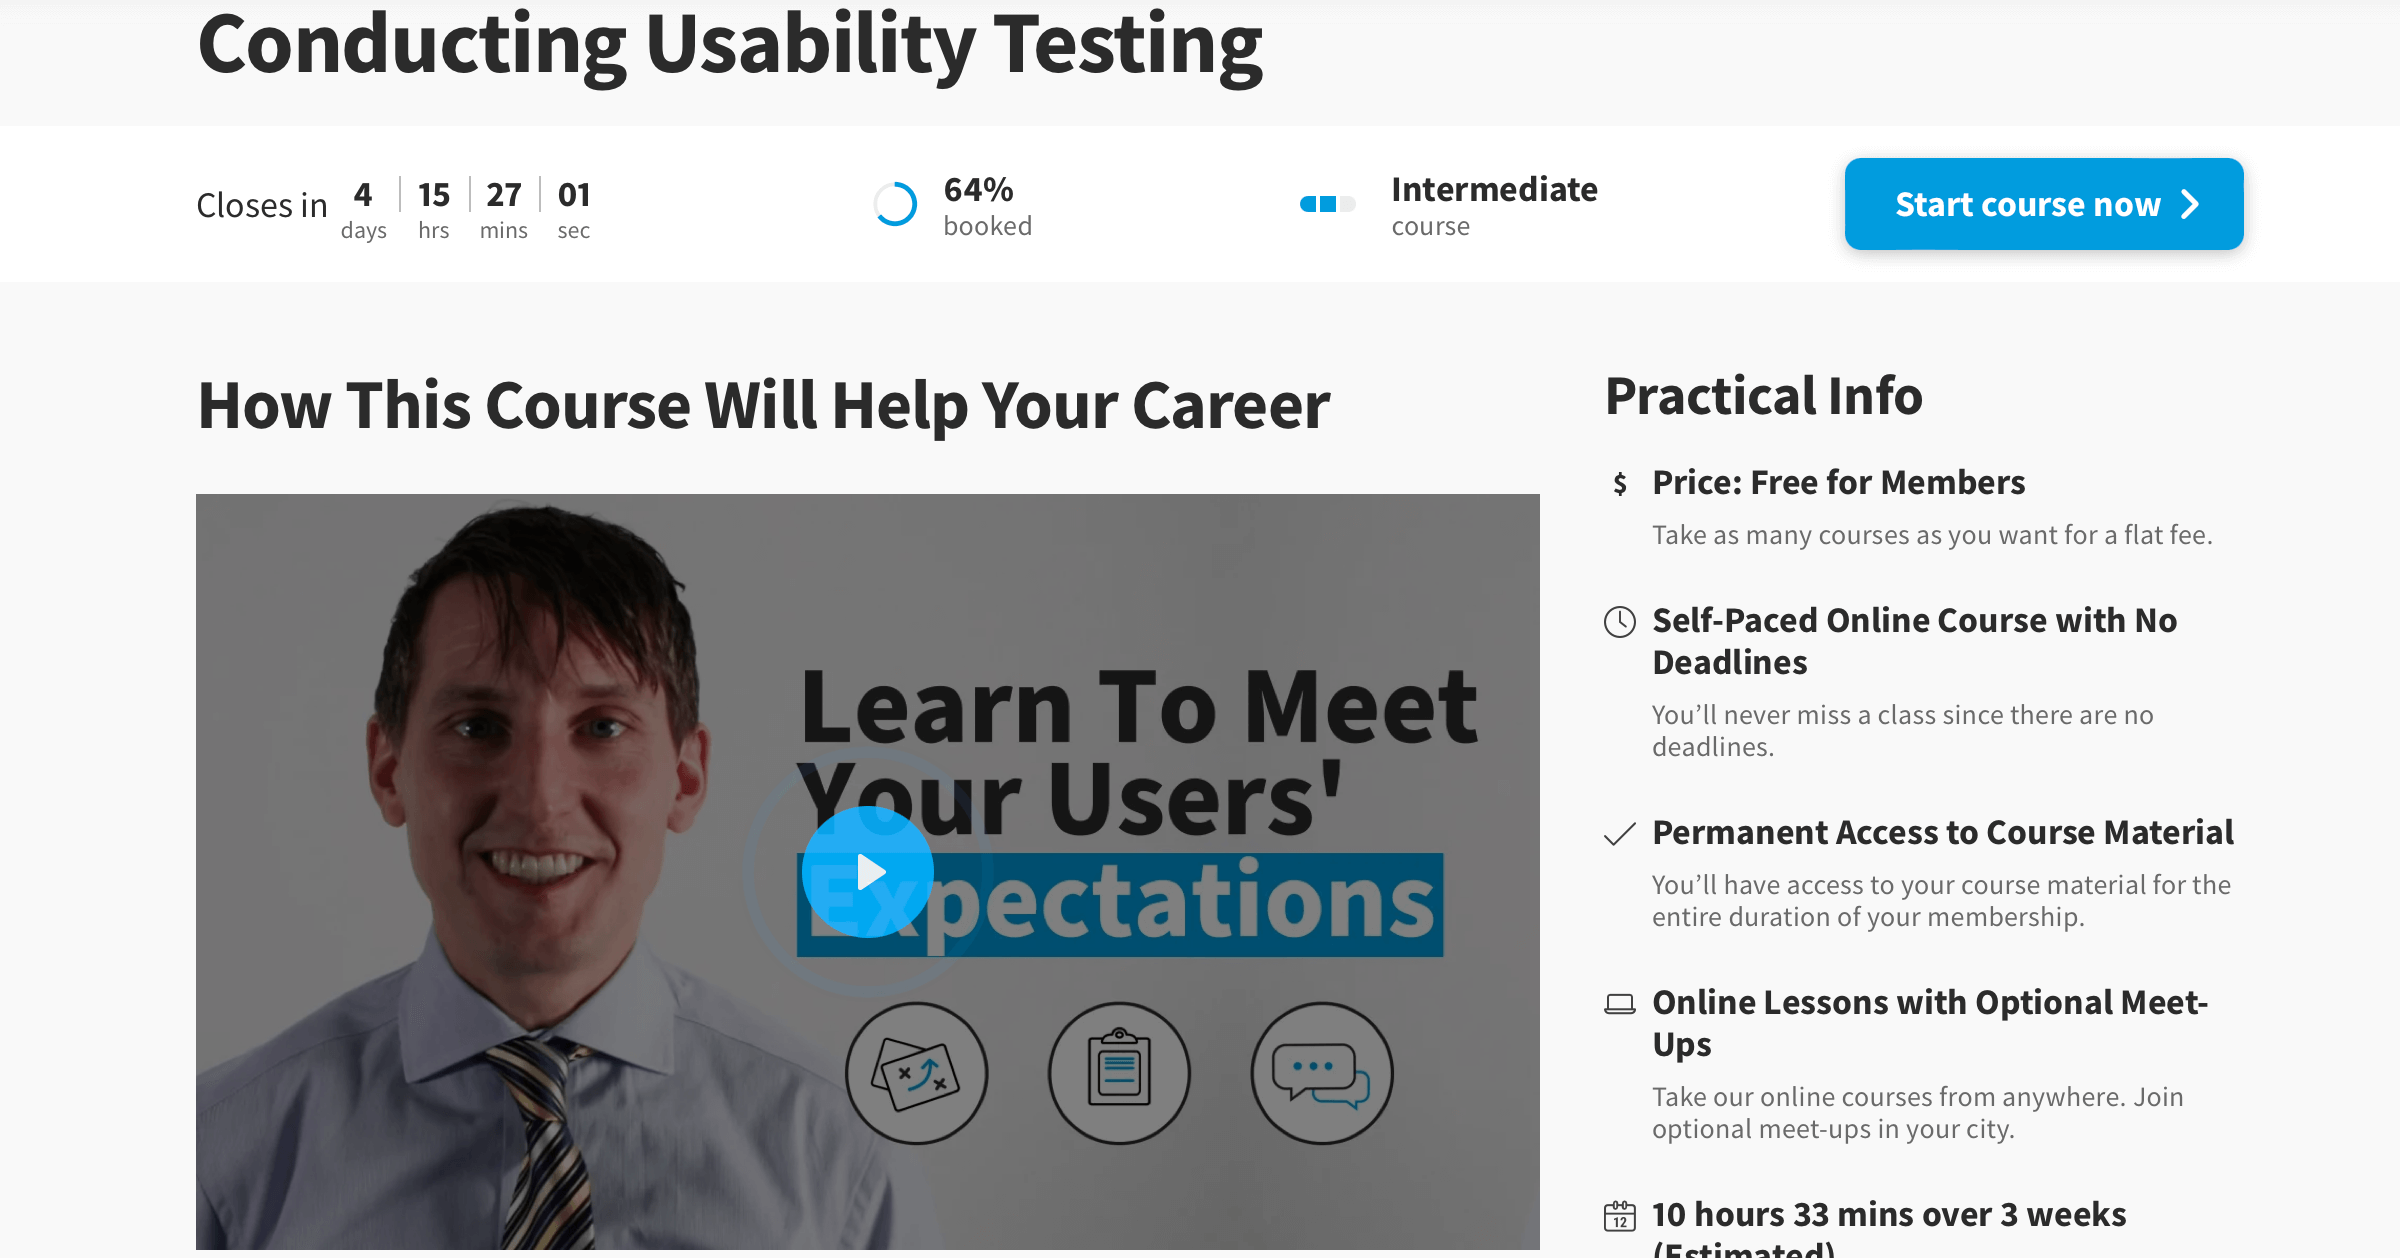 The best UX and user testing online courses - Conducting Usability Testing